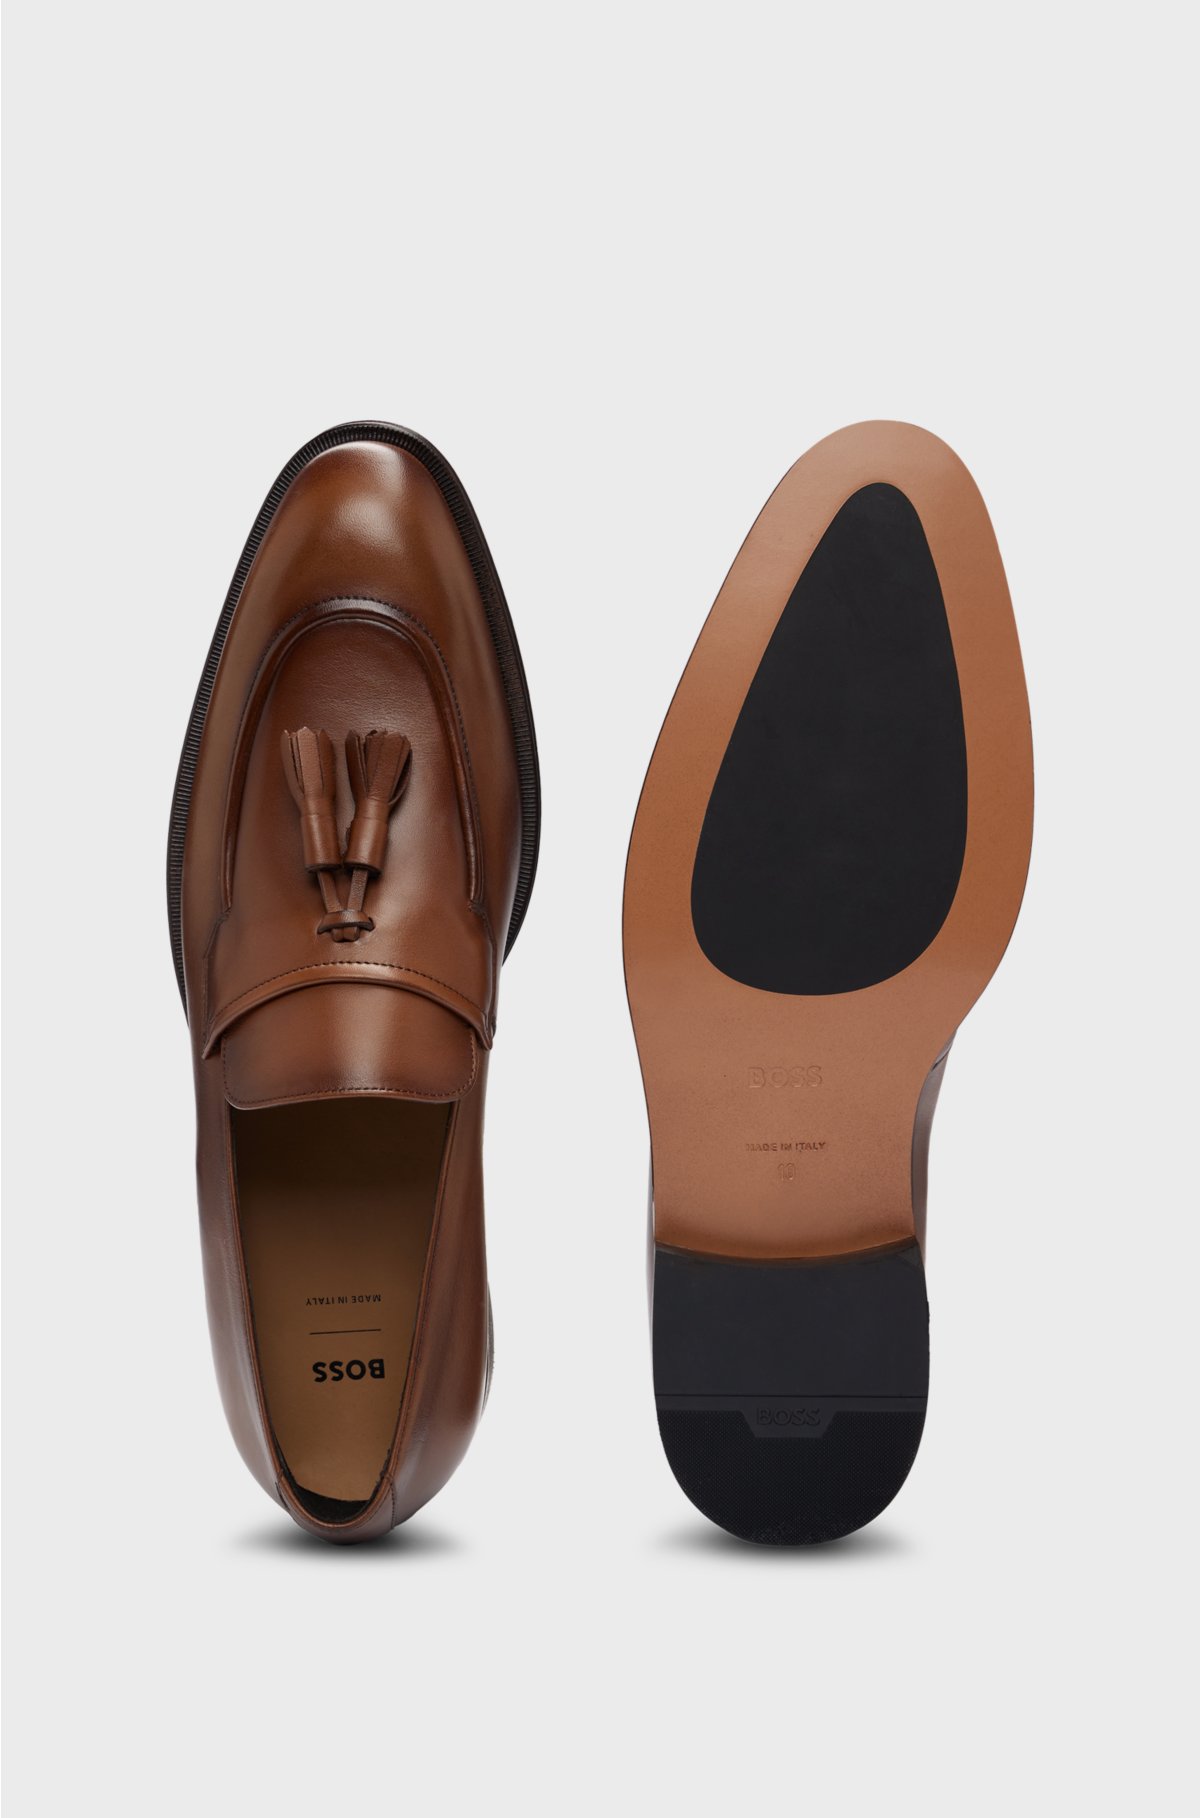 Leather loafers with tassel trim, Brown